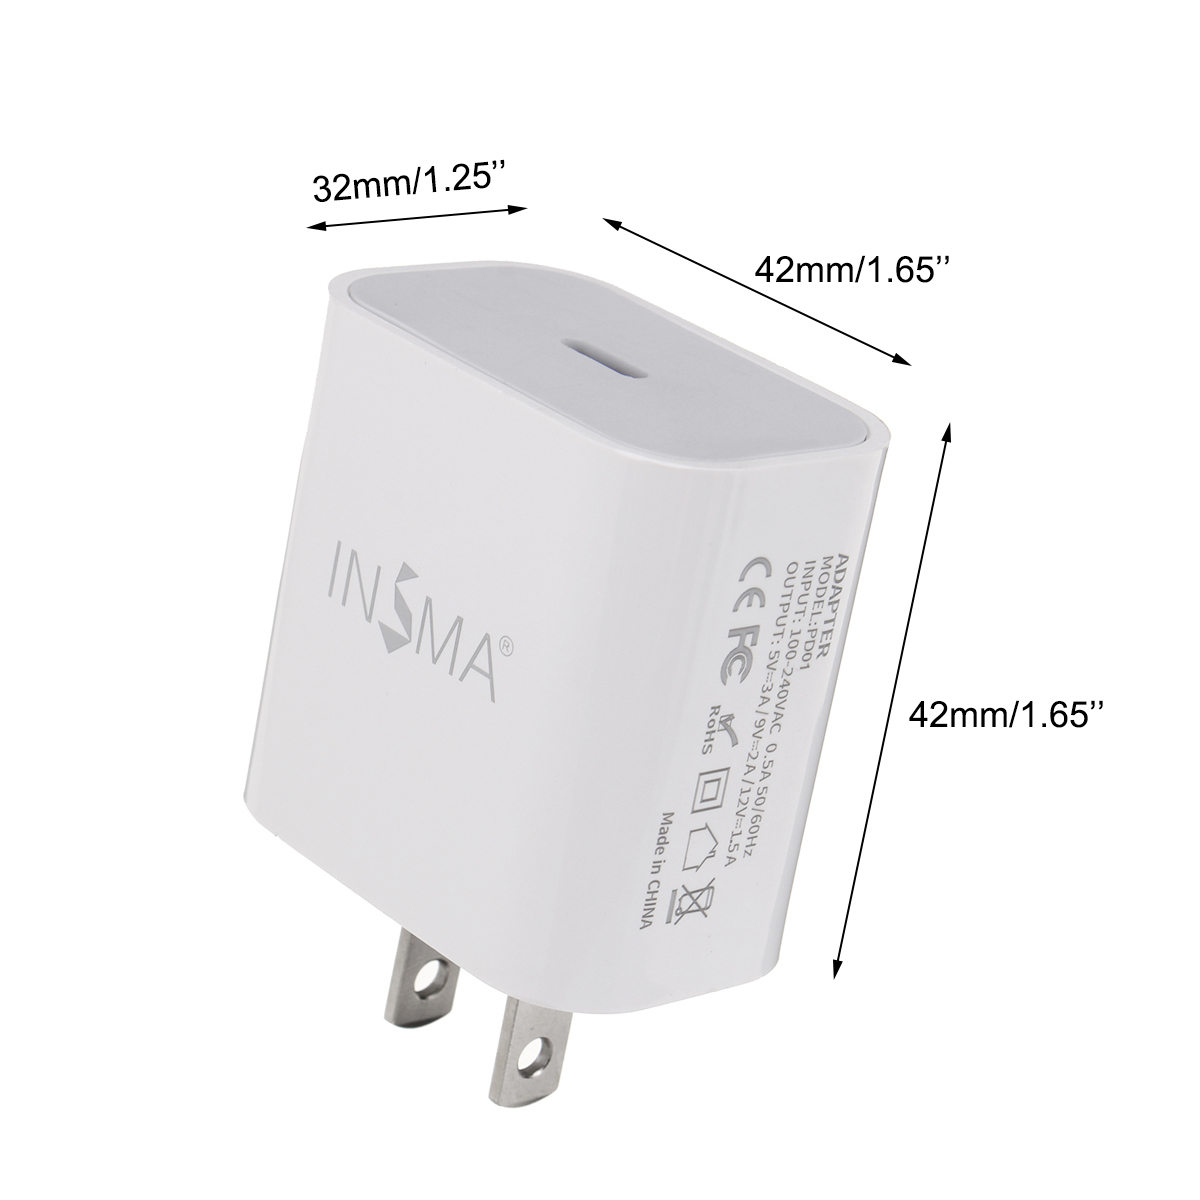 INSMA 18W Fast Charger PD3.0 USB Charger Type-C Adapter For iPhone 8 X XS 11 Pro